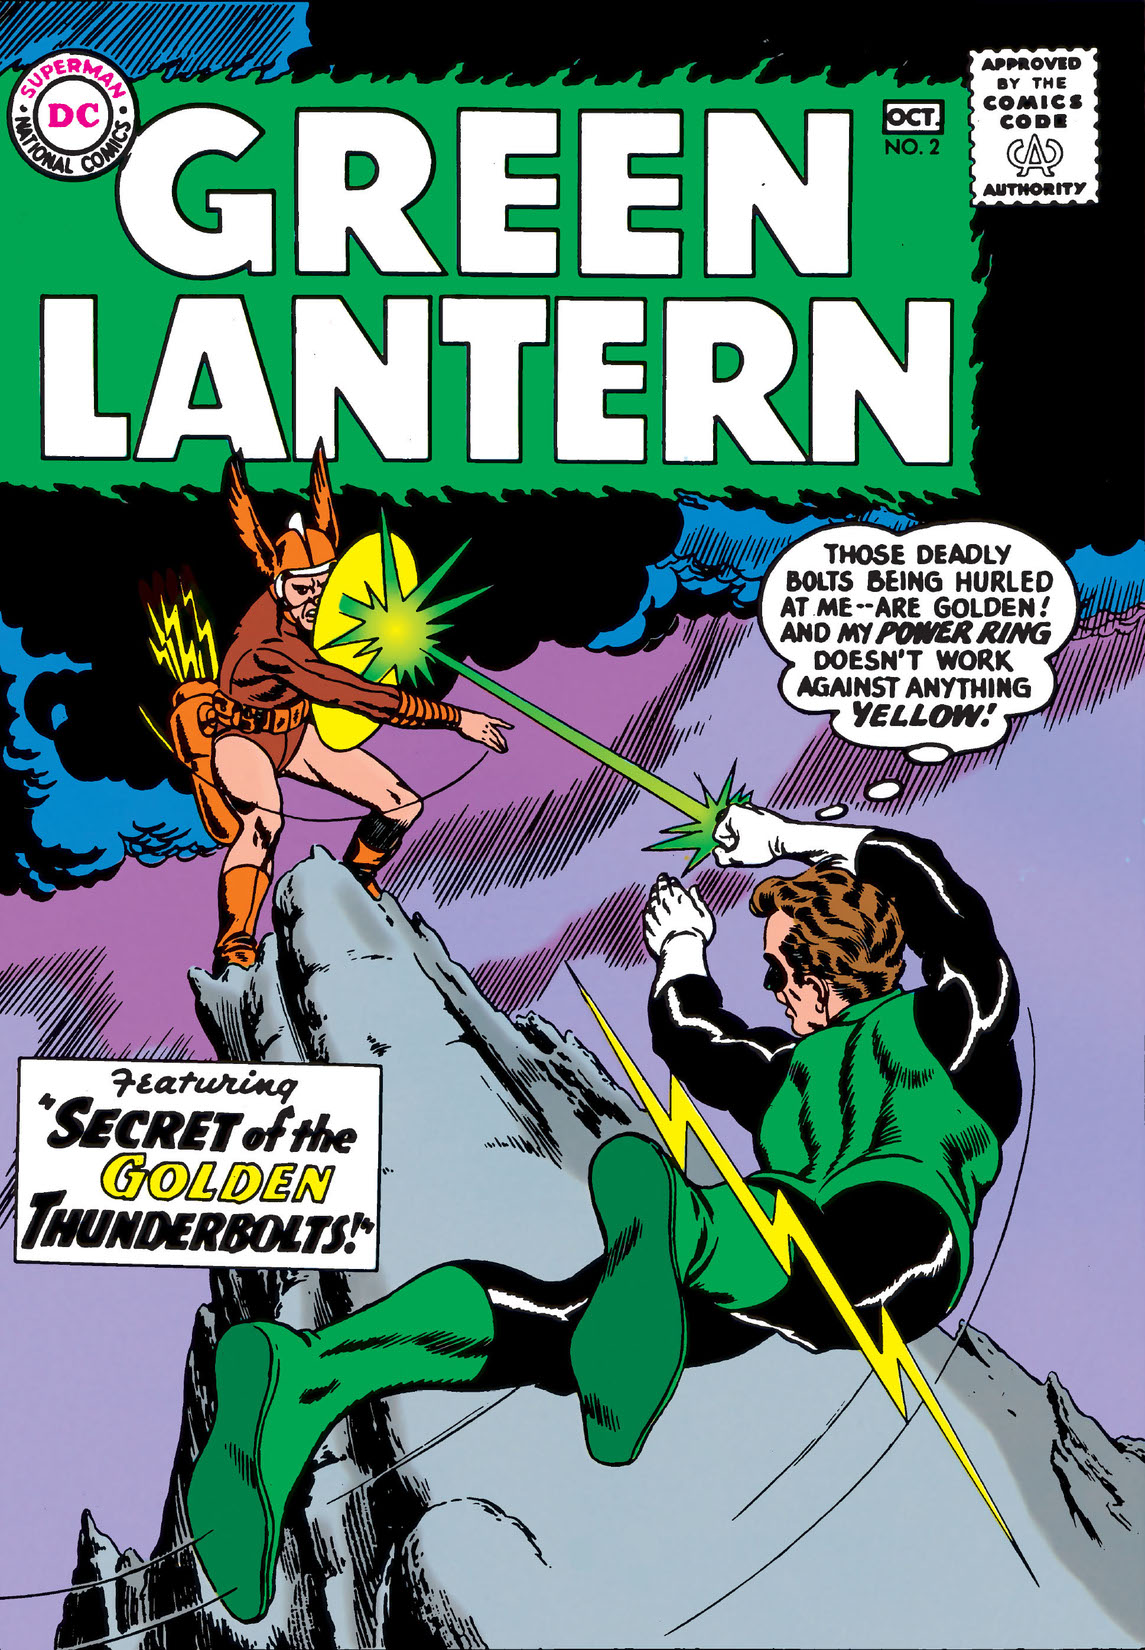 Green Lantern (1960-) #2 preview images